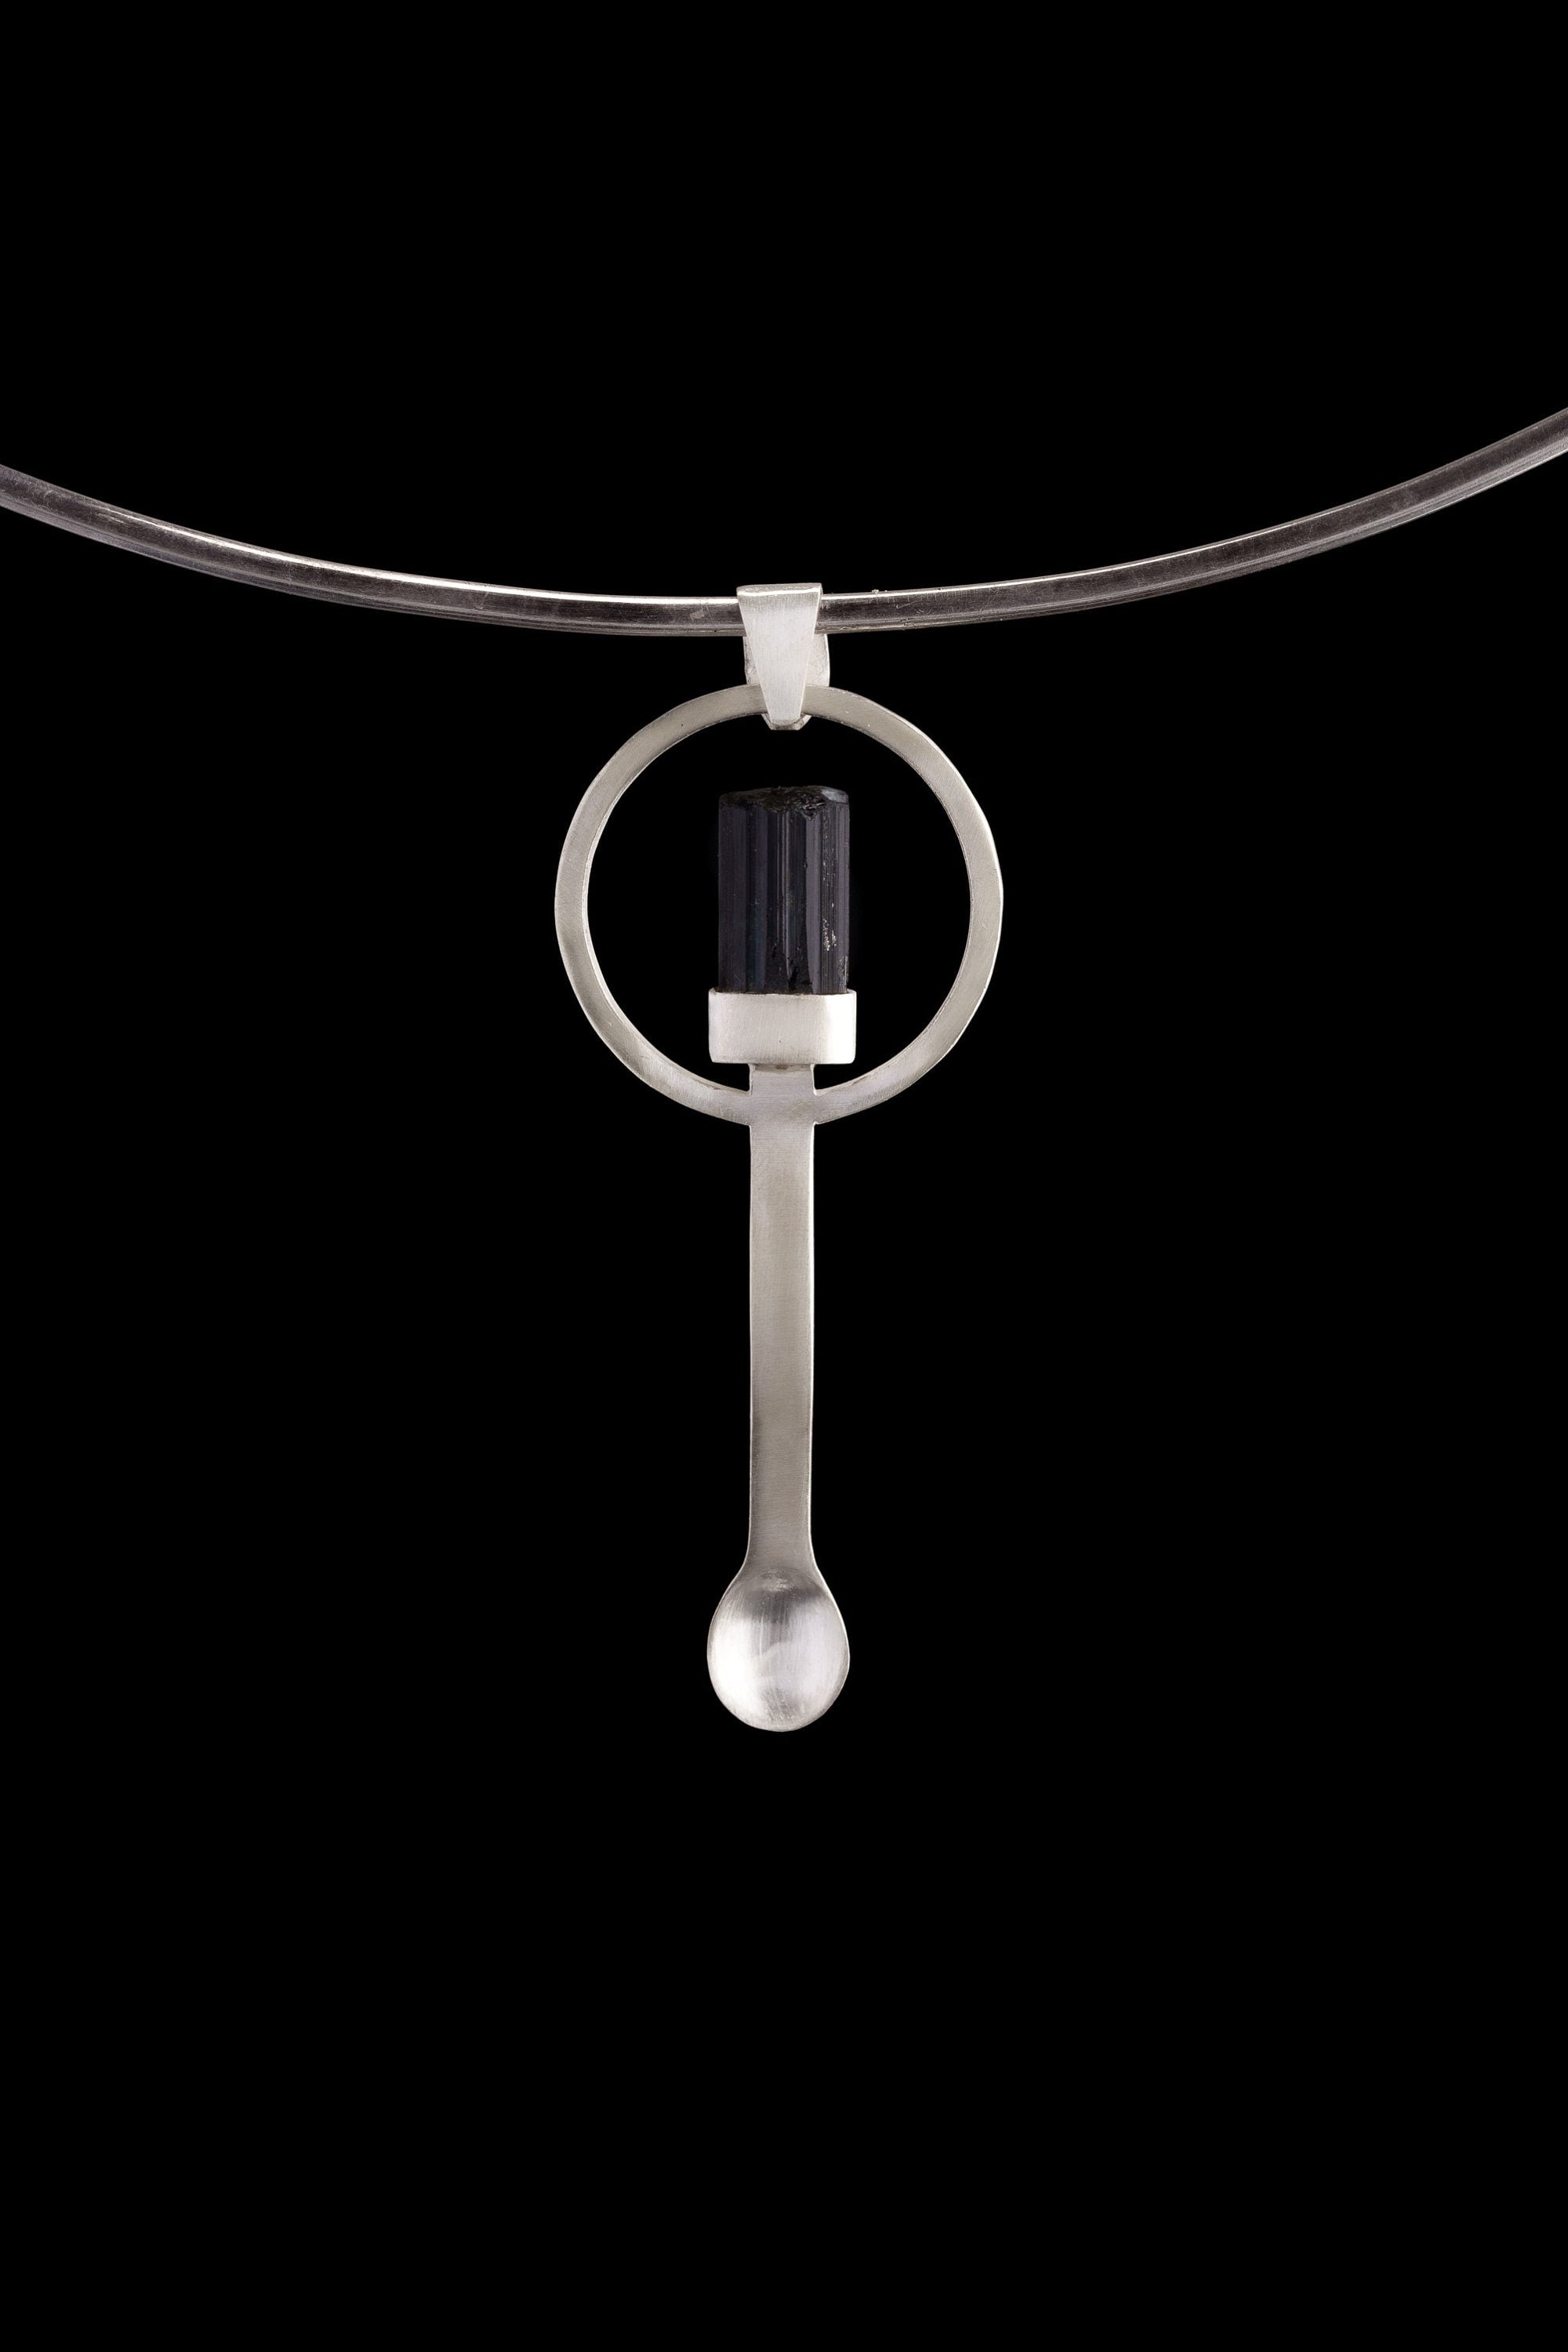 Black Tourmaline Wand - Small Spice / Ceremonial Spoon - Solid 925 Cast Silver - Unique Brush Textured - Crystal Pendant Necklace -